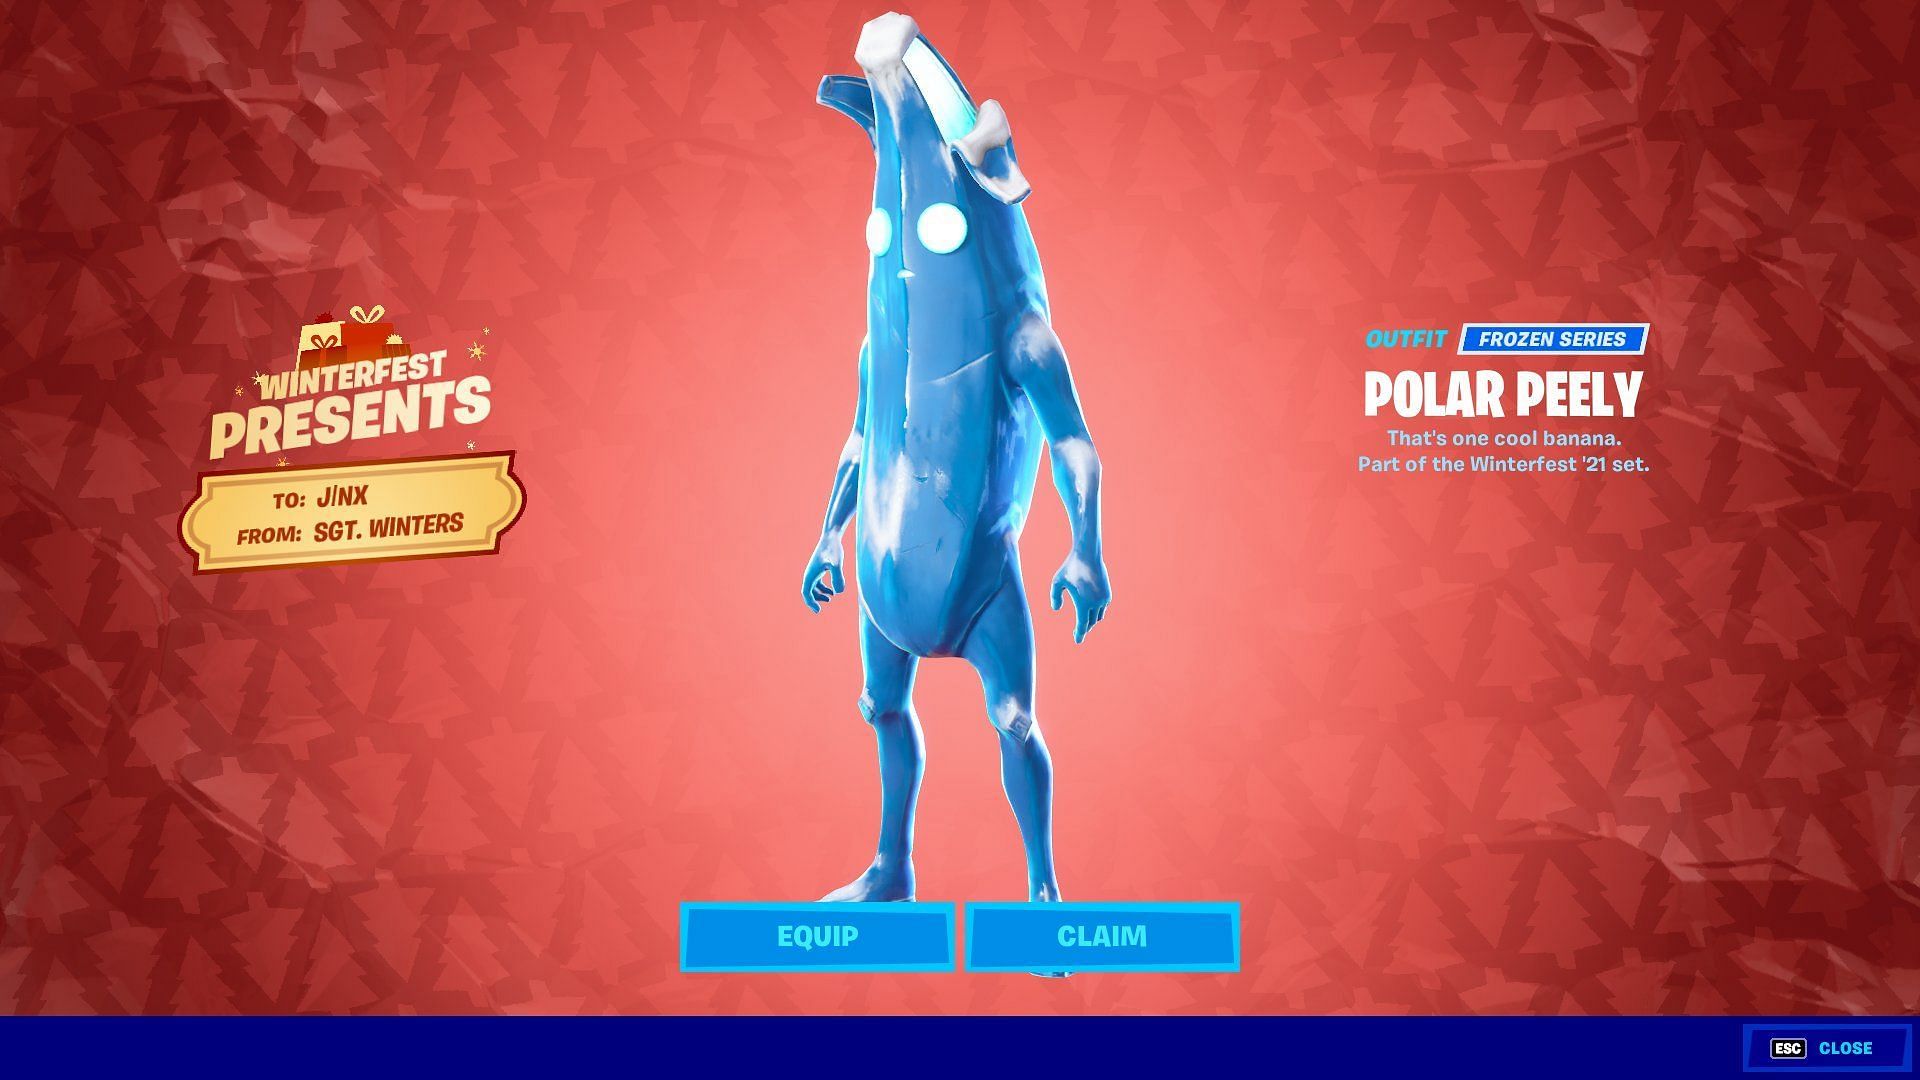 The Polar Peely is a free skin that you can get during Winterfest 2021 (Image via TyronePilvens Twitter)